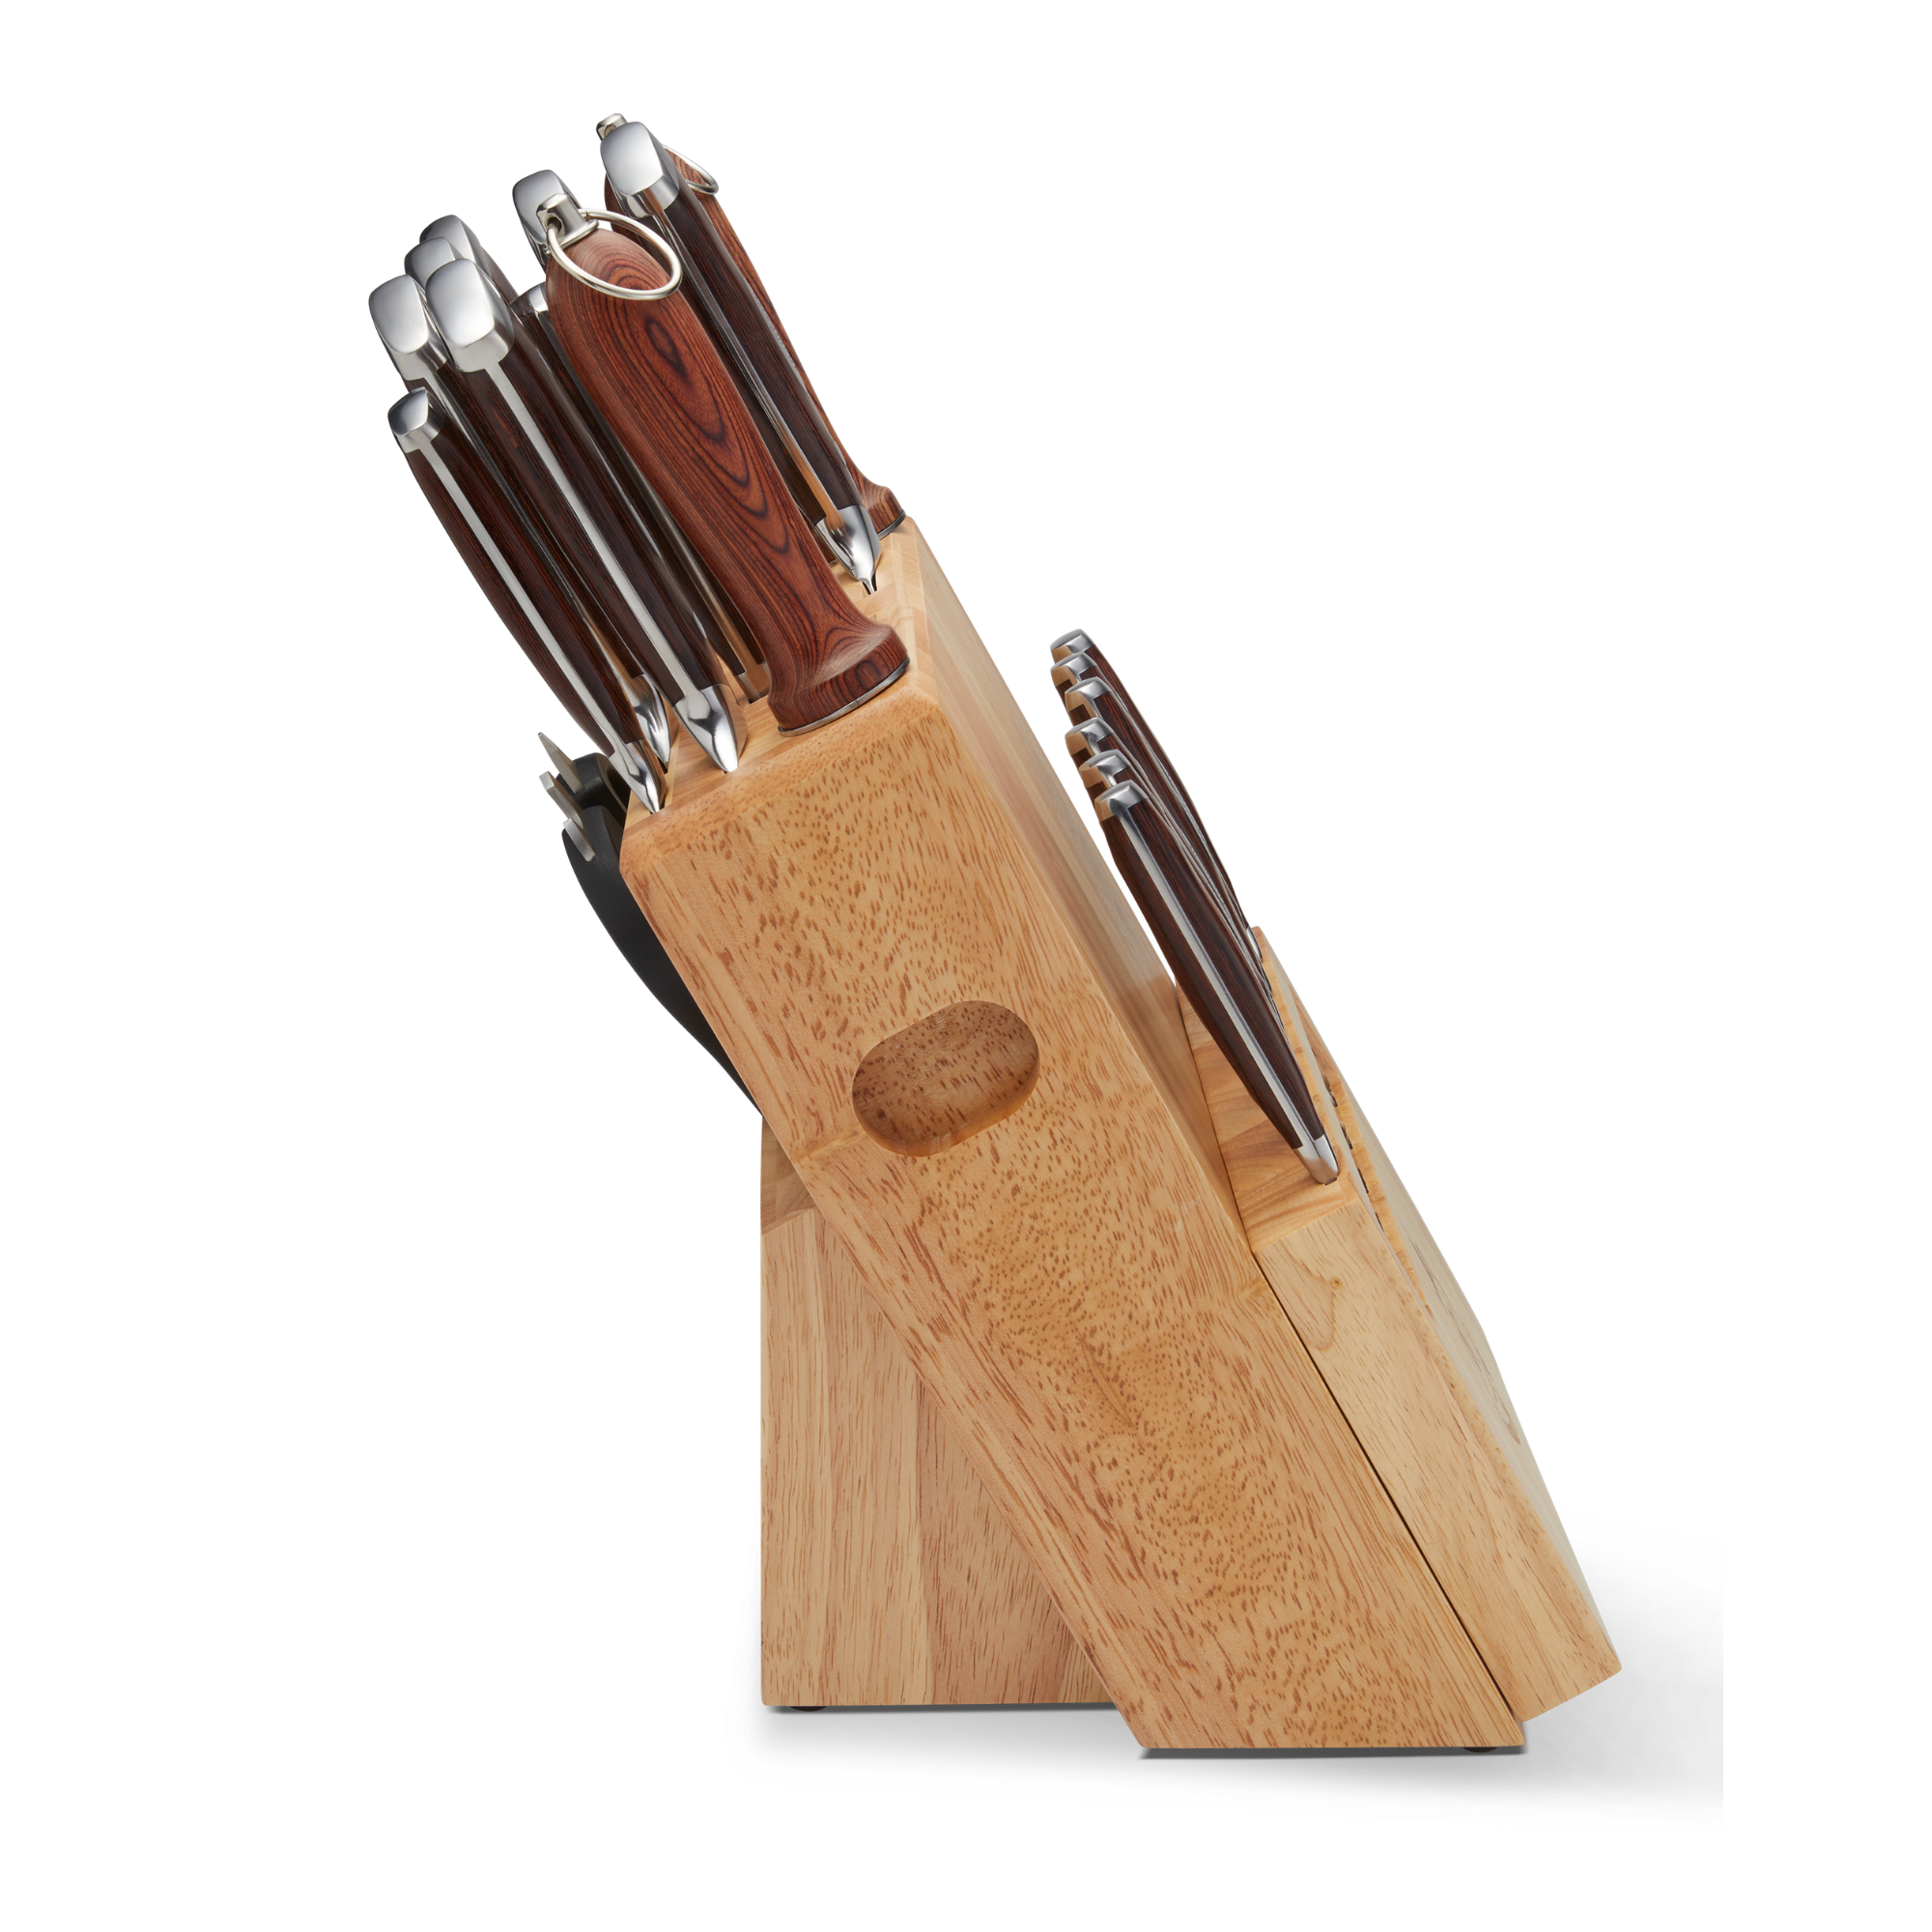 19 pc set- 12 pc set plus steak knives,  order today and get a free 8” chef knife